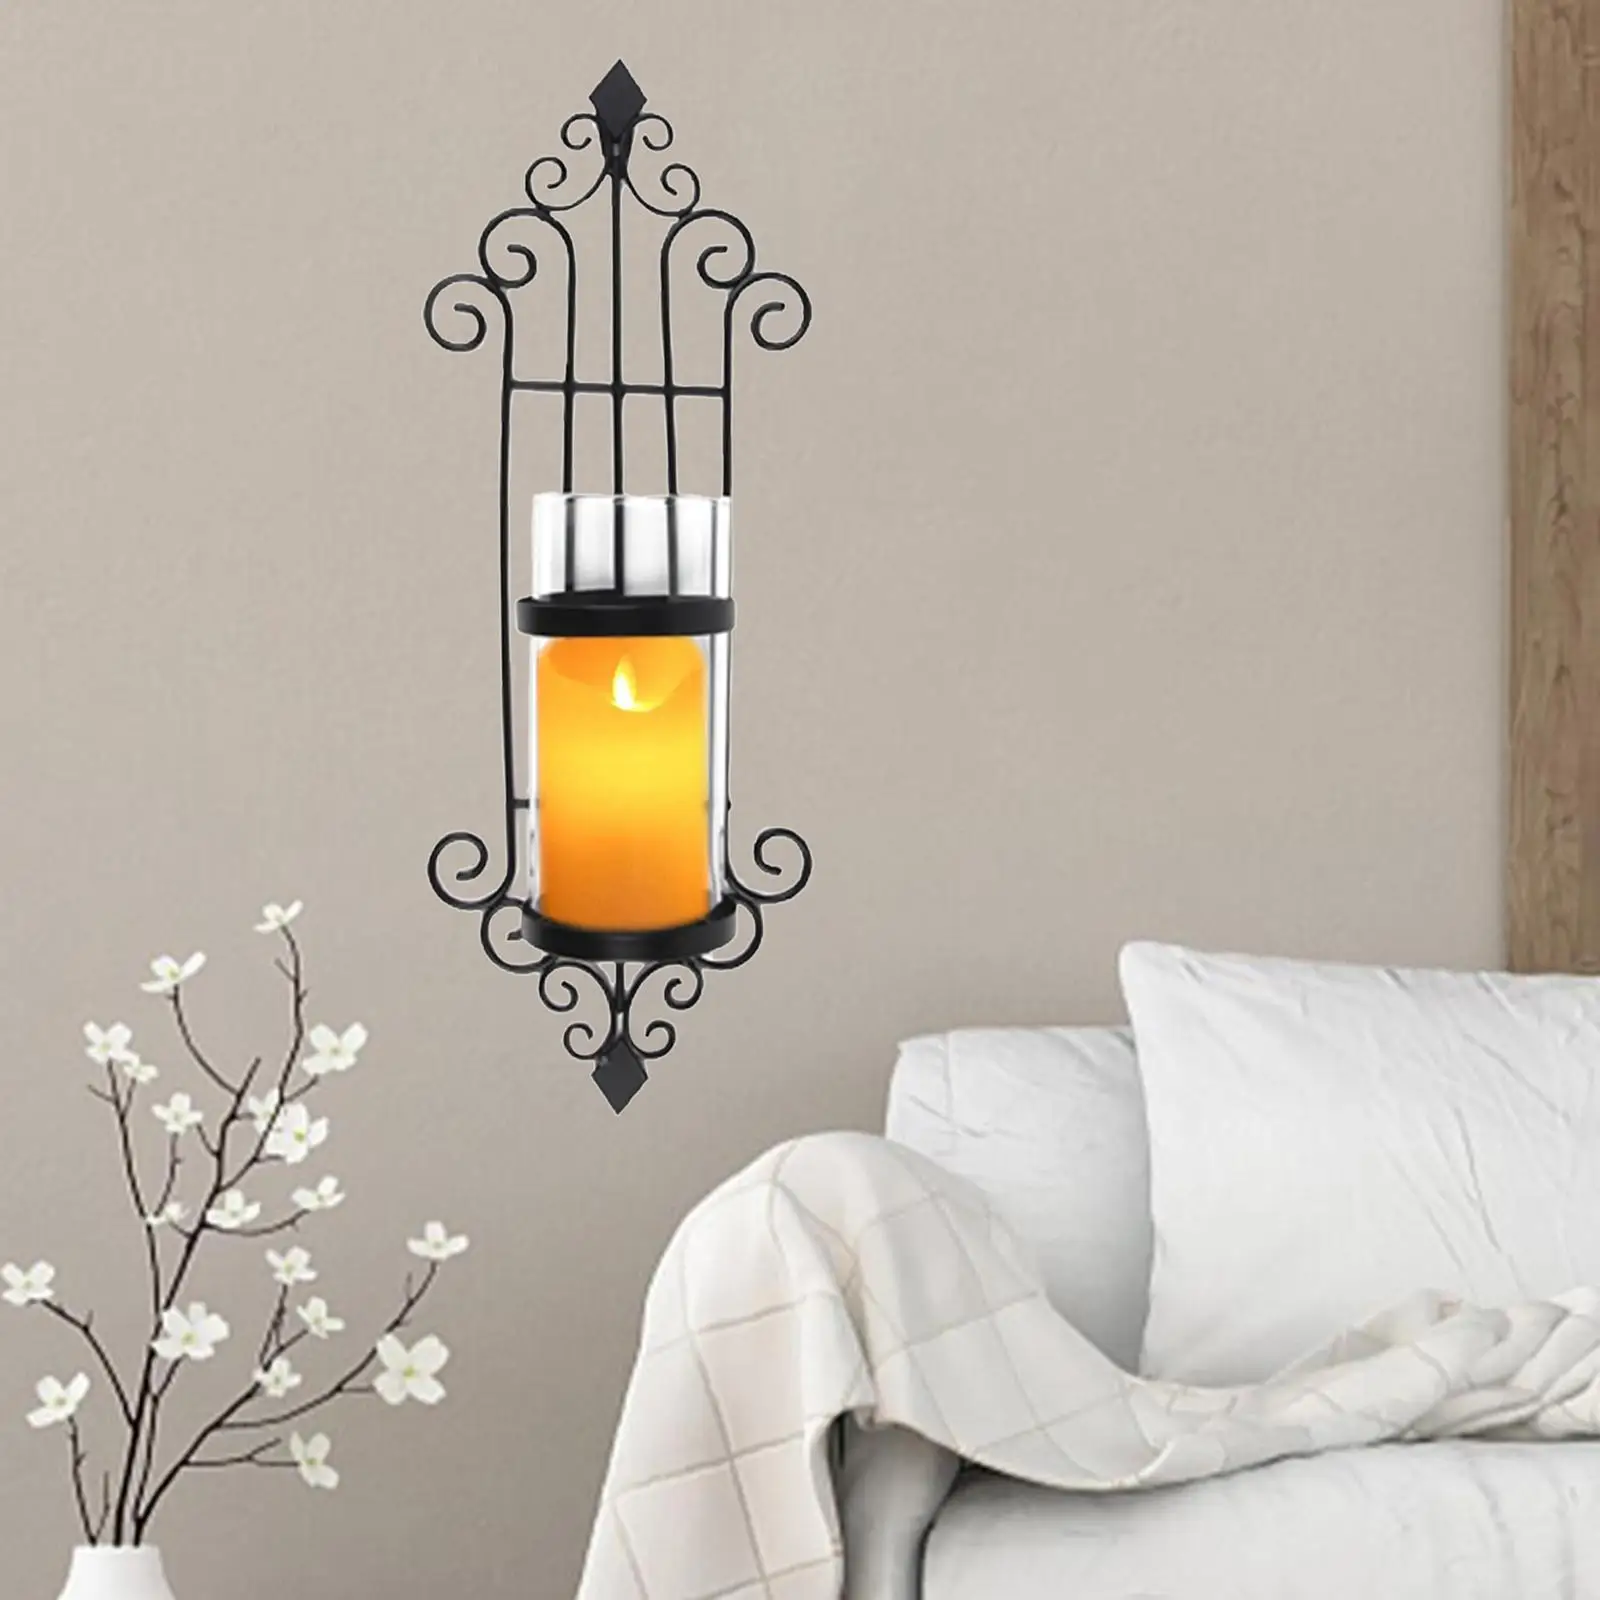 Wall Candle Sconce Set of 2 Wrought Iron Candle Holder Hanging Wall Mounted Candle Sconces for Living Room Home Decor